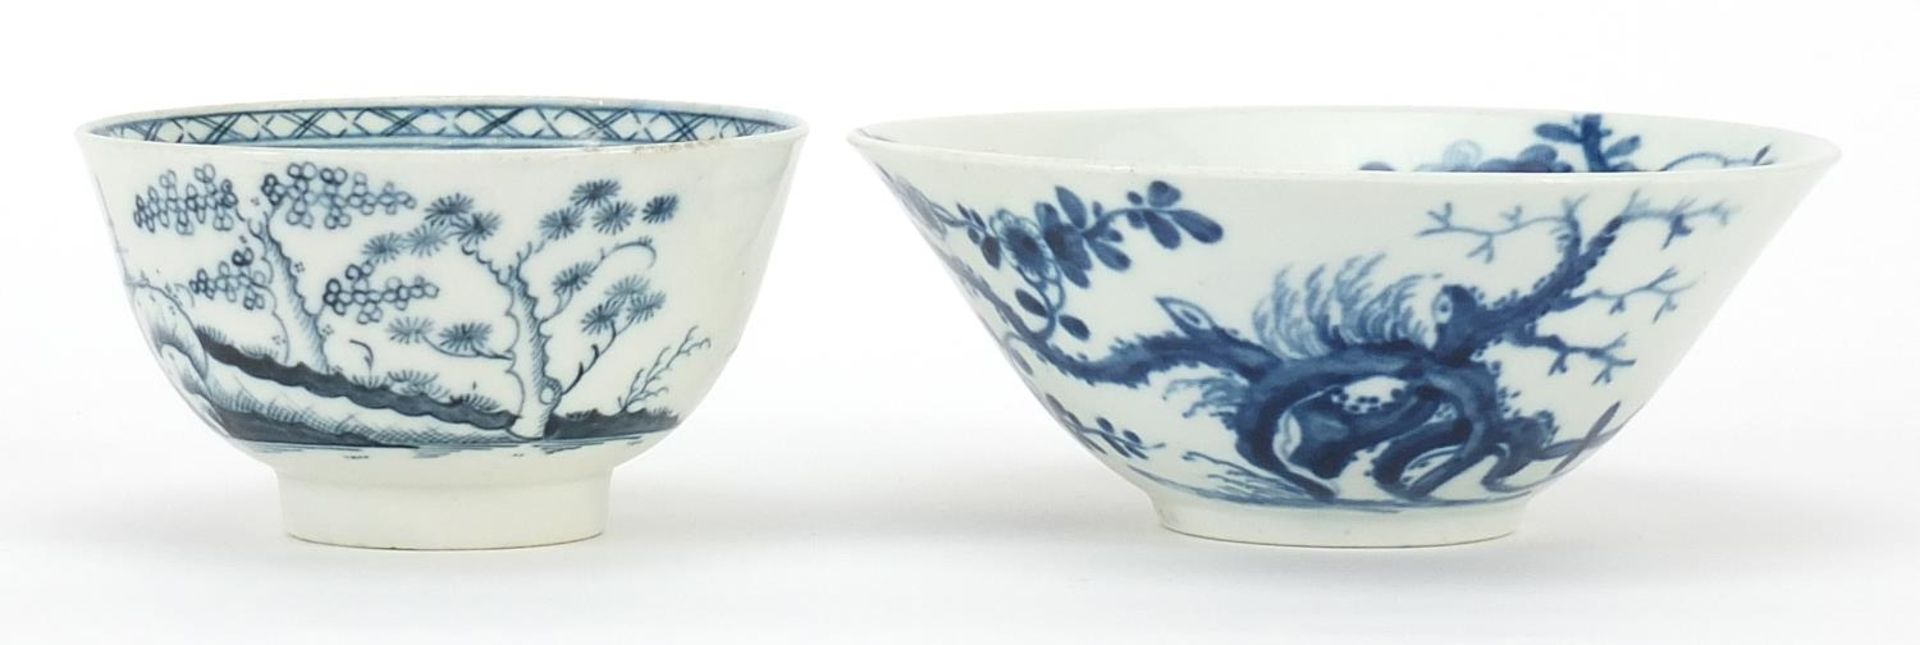 Two Worcester blue and white porcelain bowls, the largest 11cm in diameter